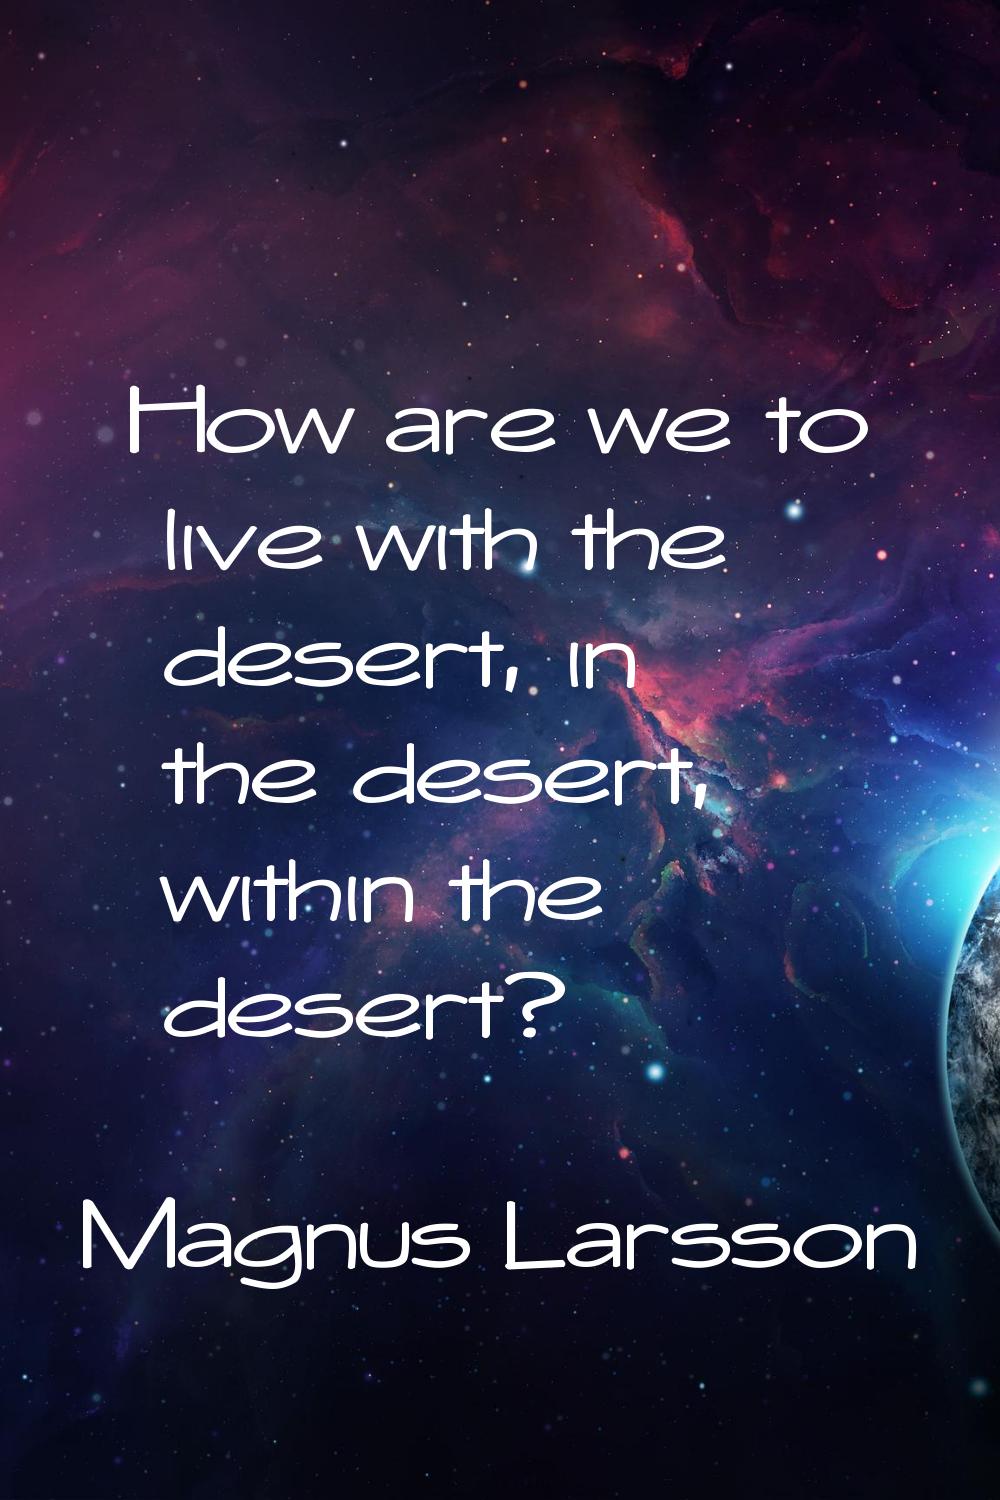 How are we to live with the desert, in the desert, within the desert?